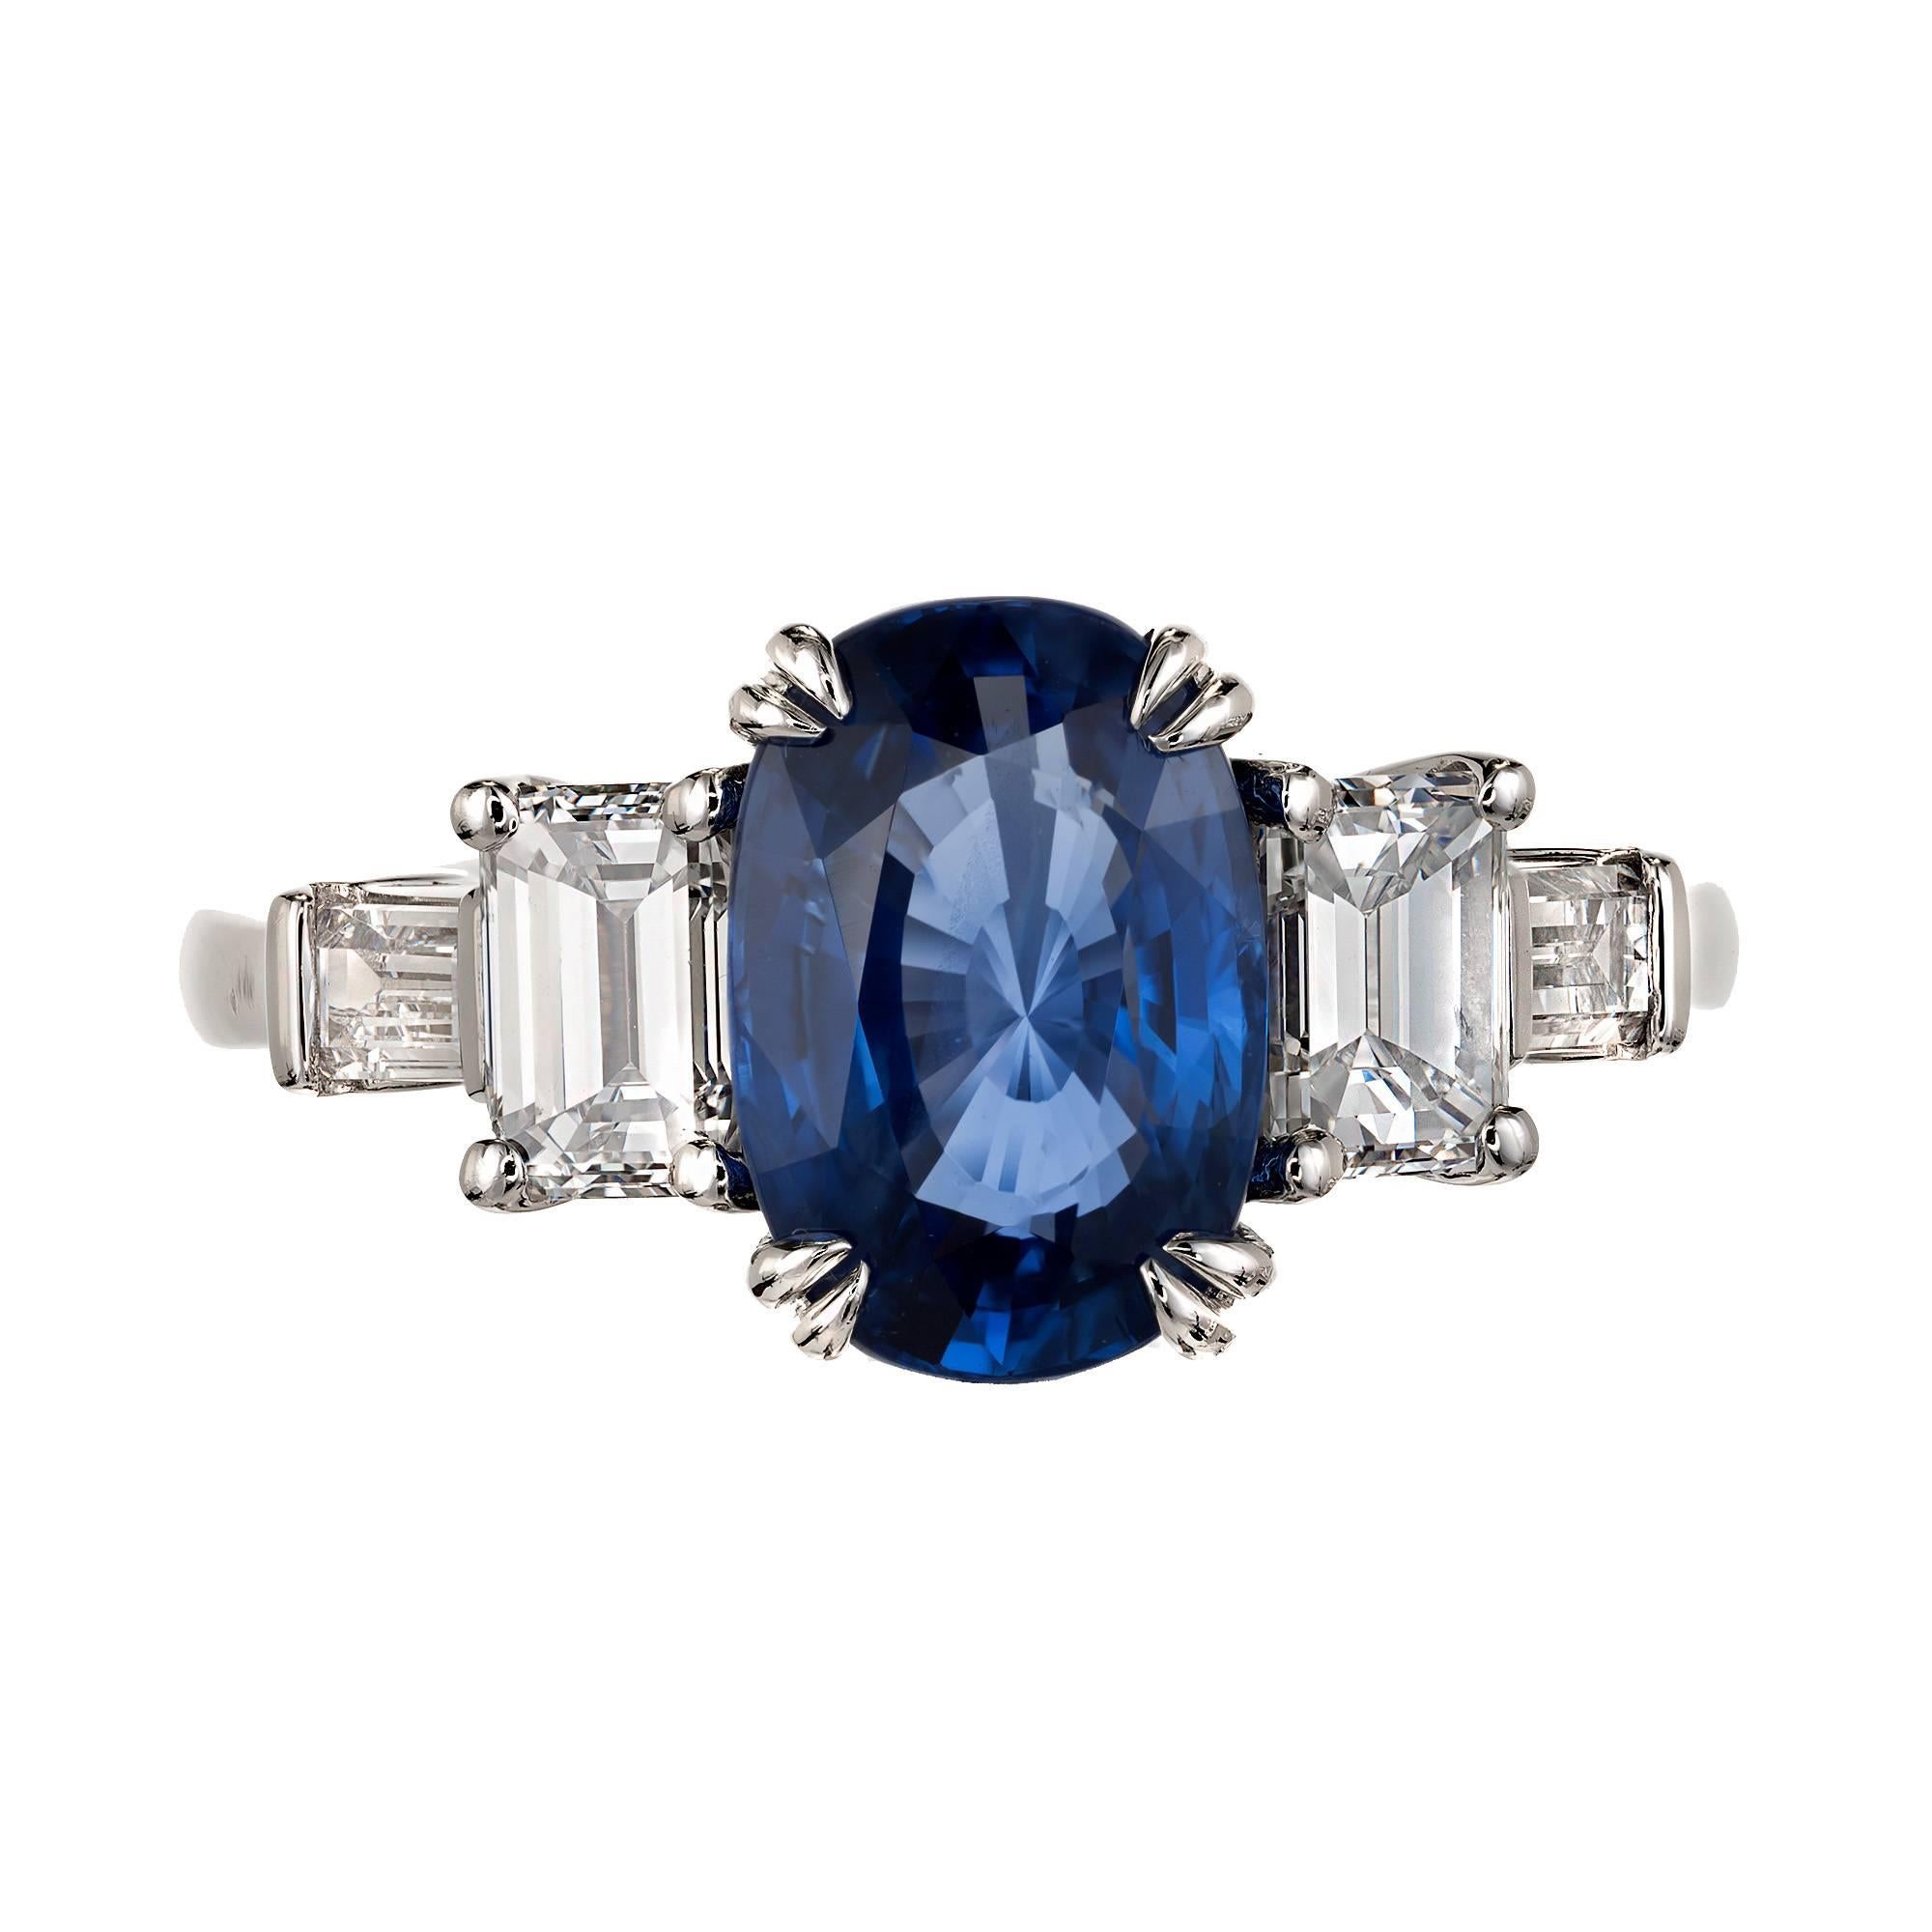 Bright blue natural no heat Sapphire from Sri Lanka in a handmade three-stone platinum engagement ring setting. Two baguette side diamonds. From the Peter Suchy workshop. 

1 Top gem bright blue oval Sapphire, approx. total weight 3.44cts, bright